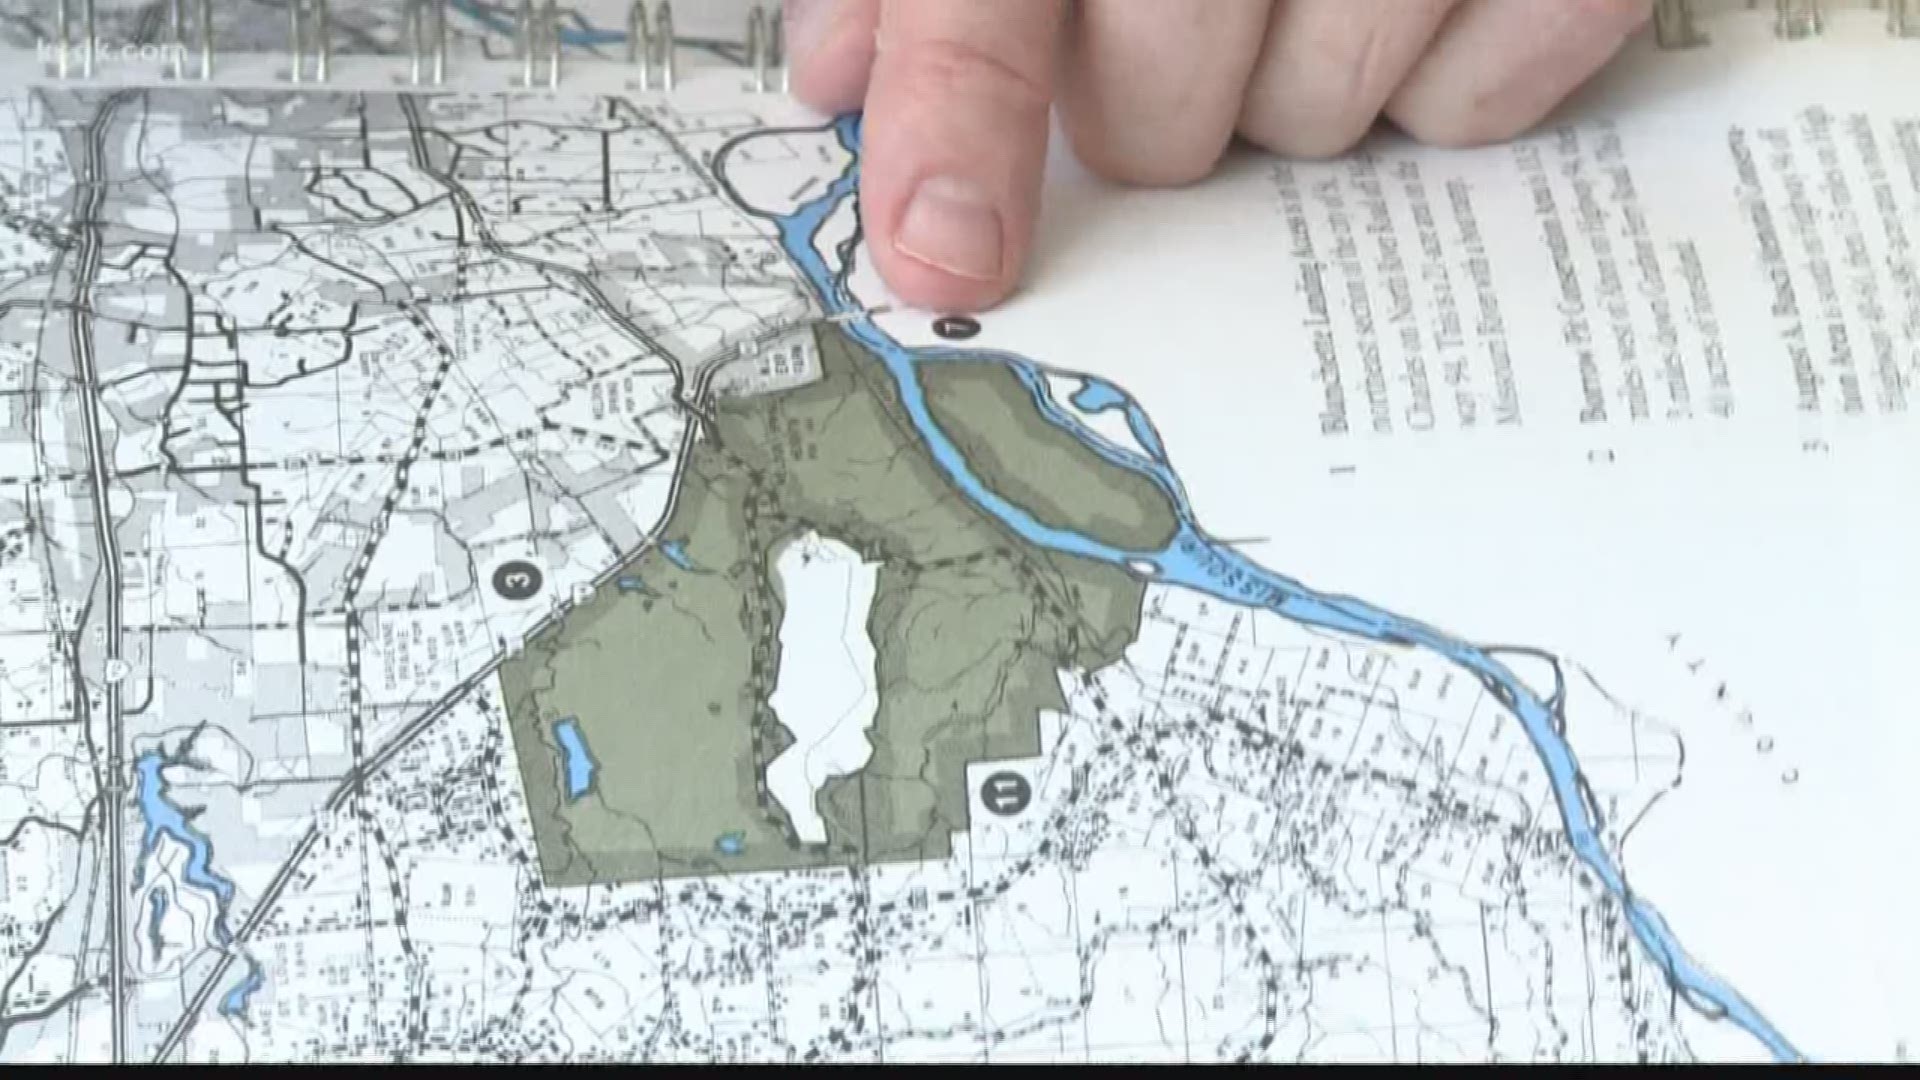 Major changes could be coming to St. Charles County. This comes after a recent vote by council members to build more than 200 residences on the Missouri Bluffs.